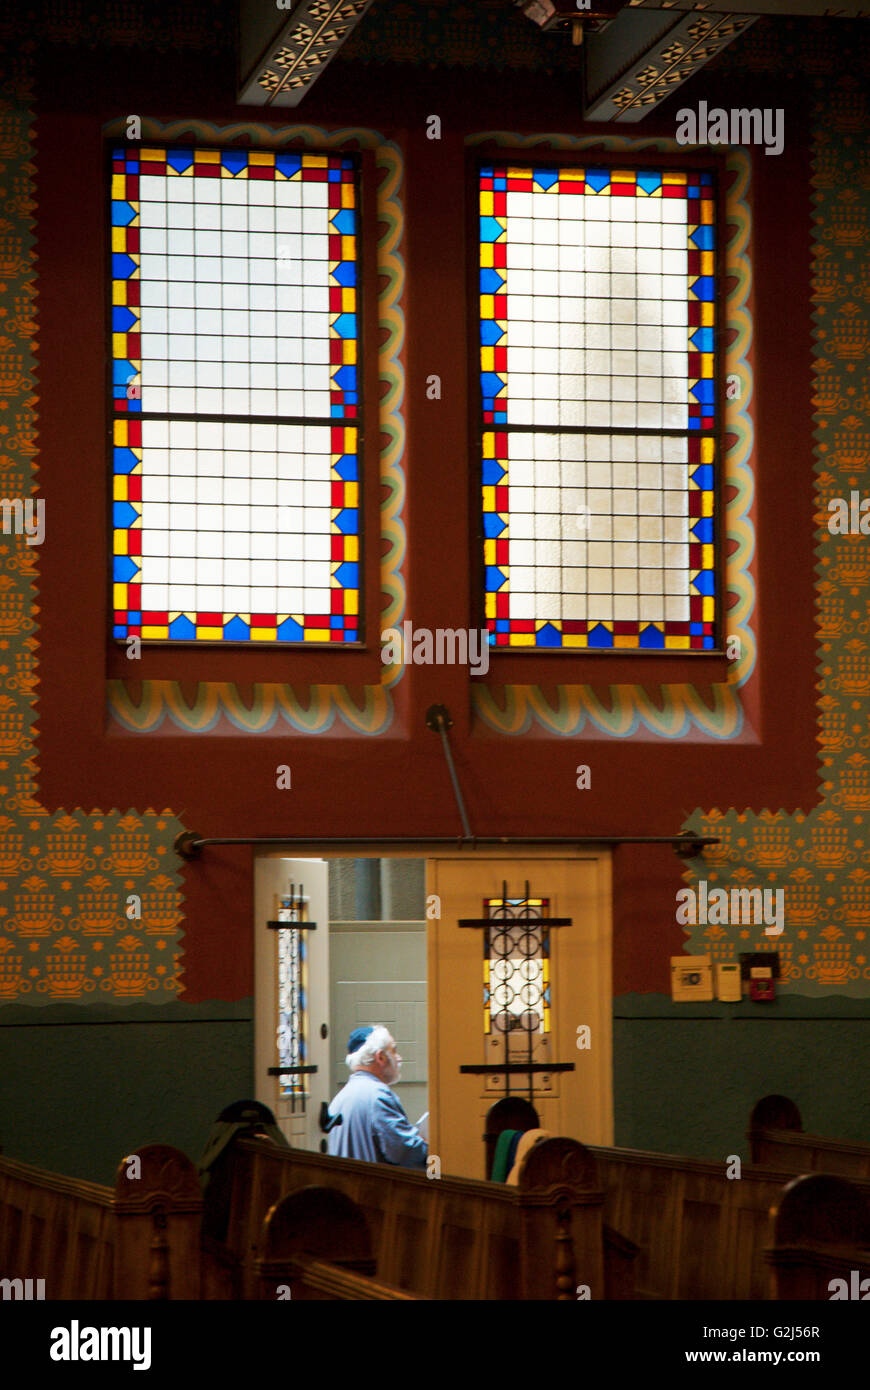 Elderly Man in Doorway of Synagogue, Budapest, Hungary Stock Photo